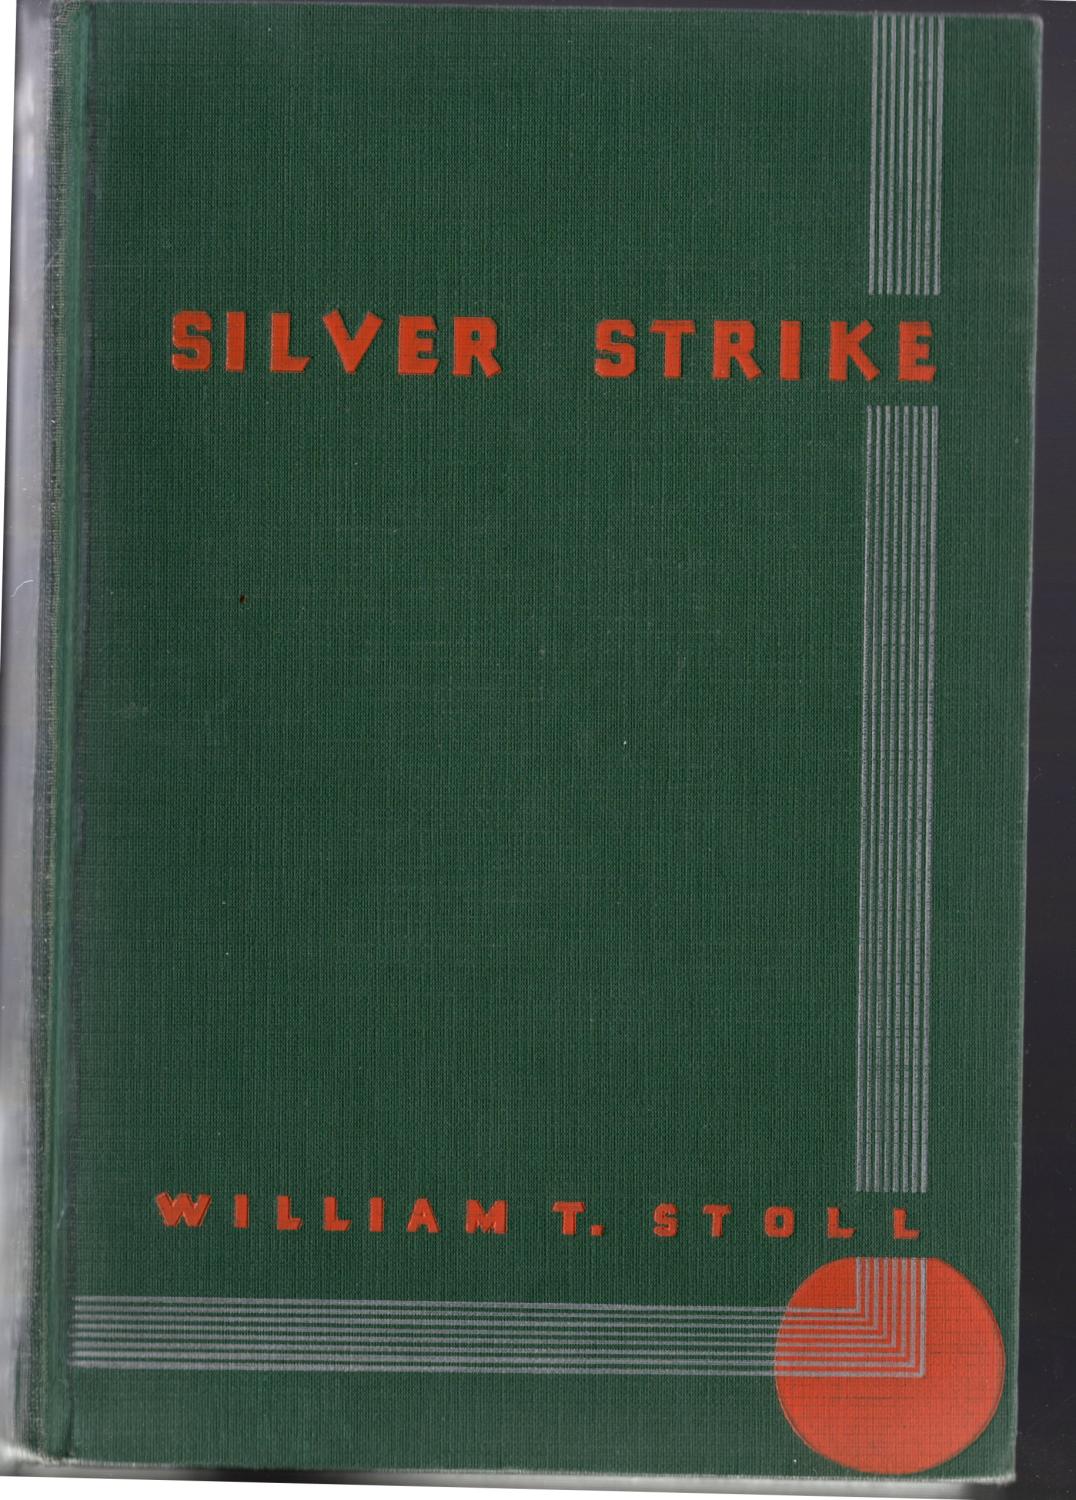 Silver strike: The true story of silver mining in the Coeur d'Alenes (book cover)